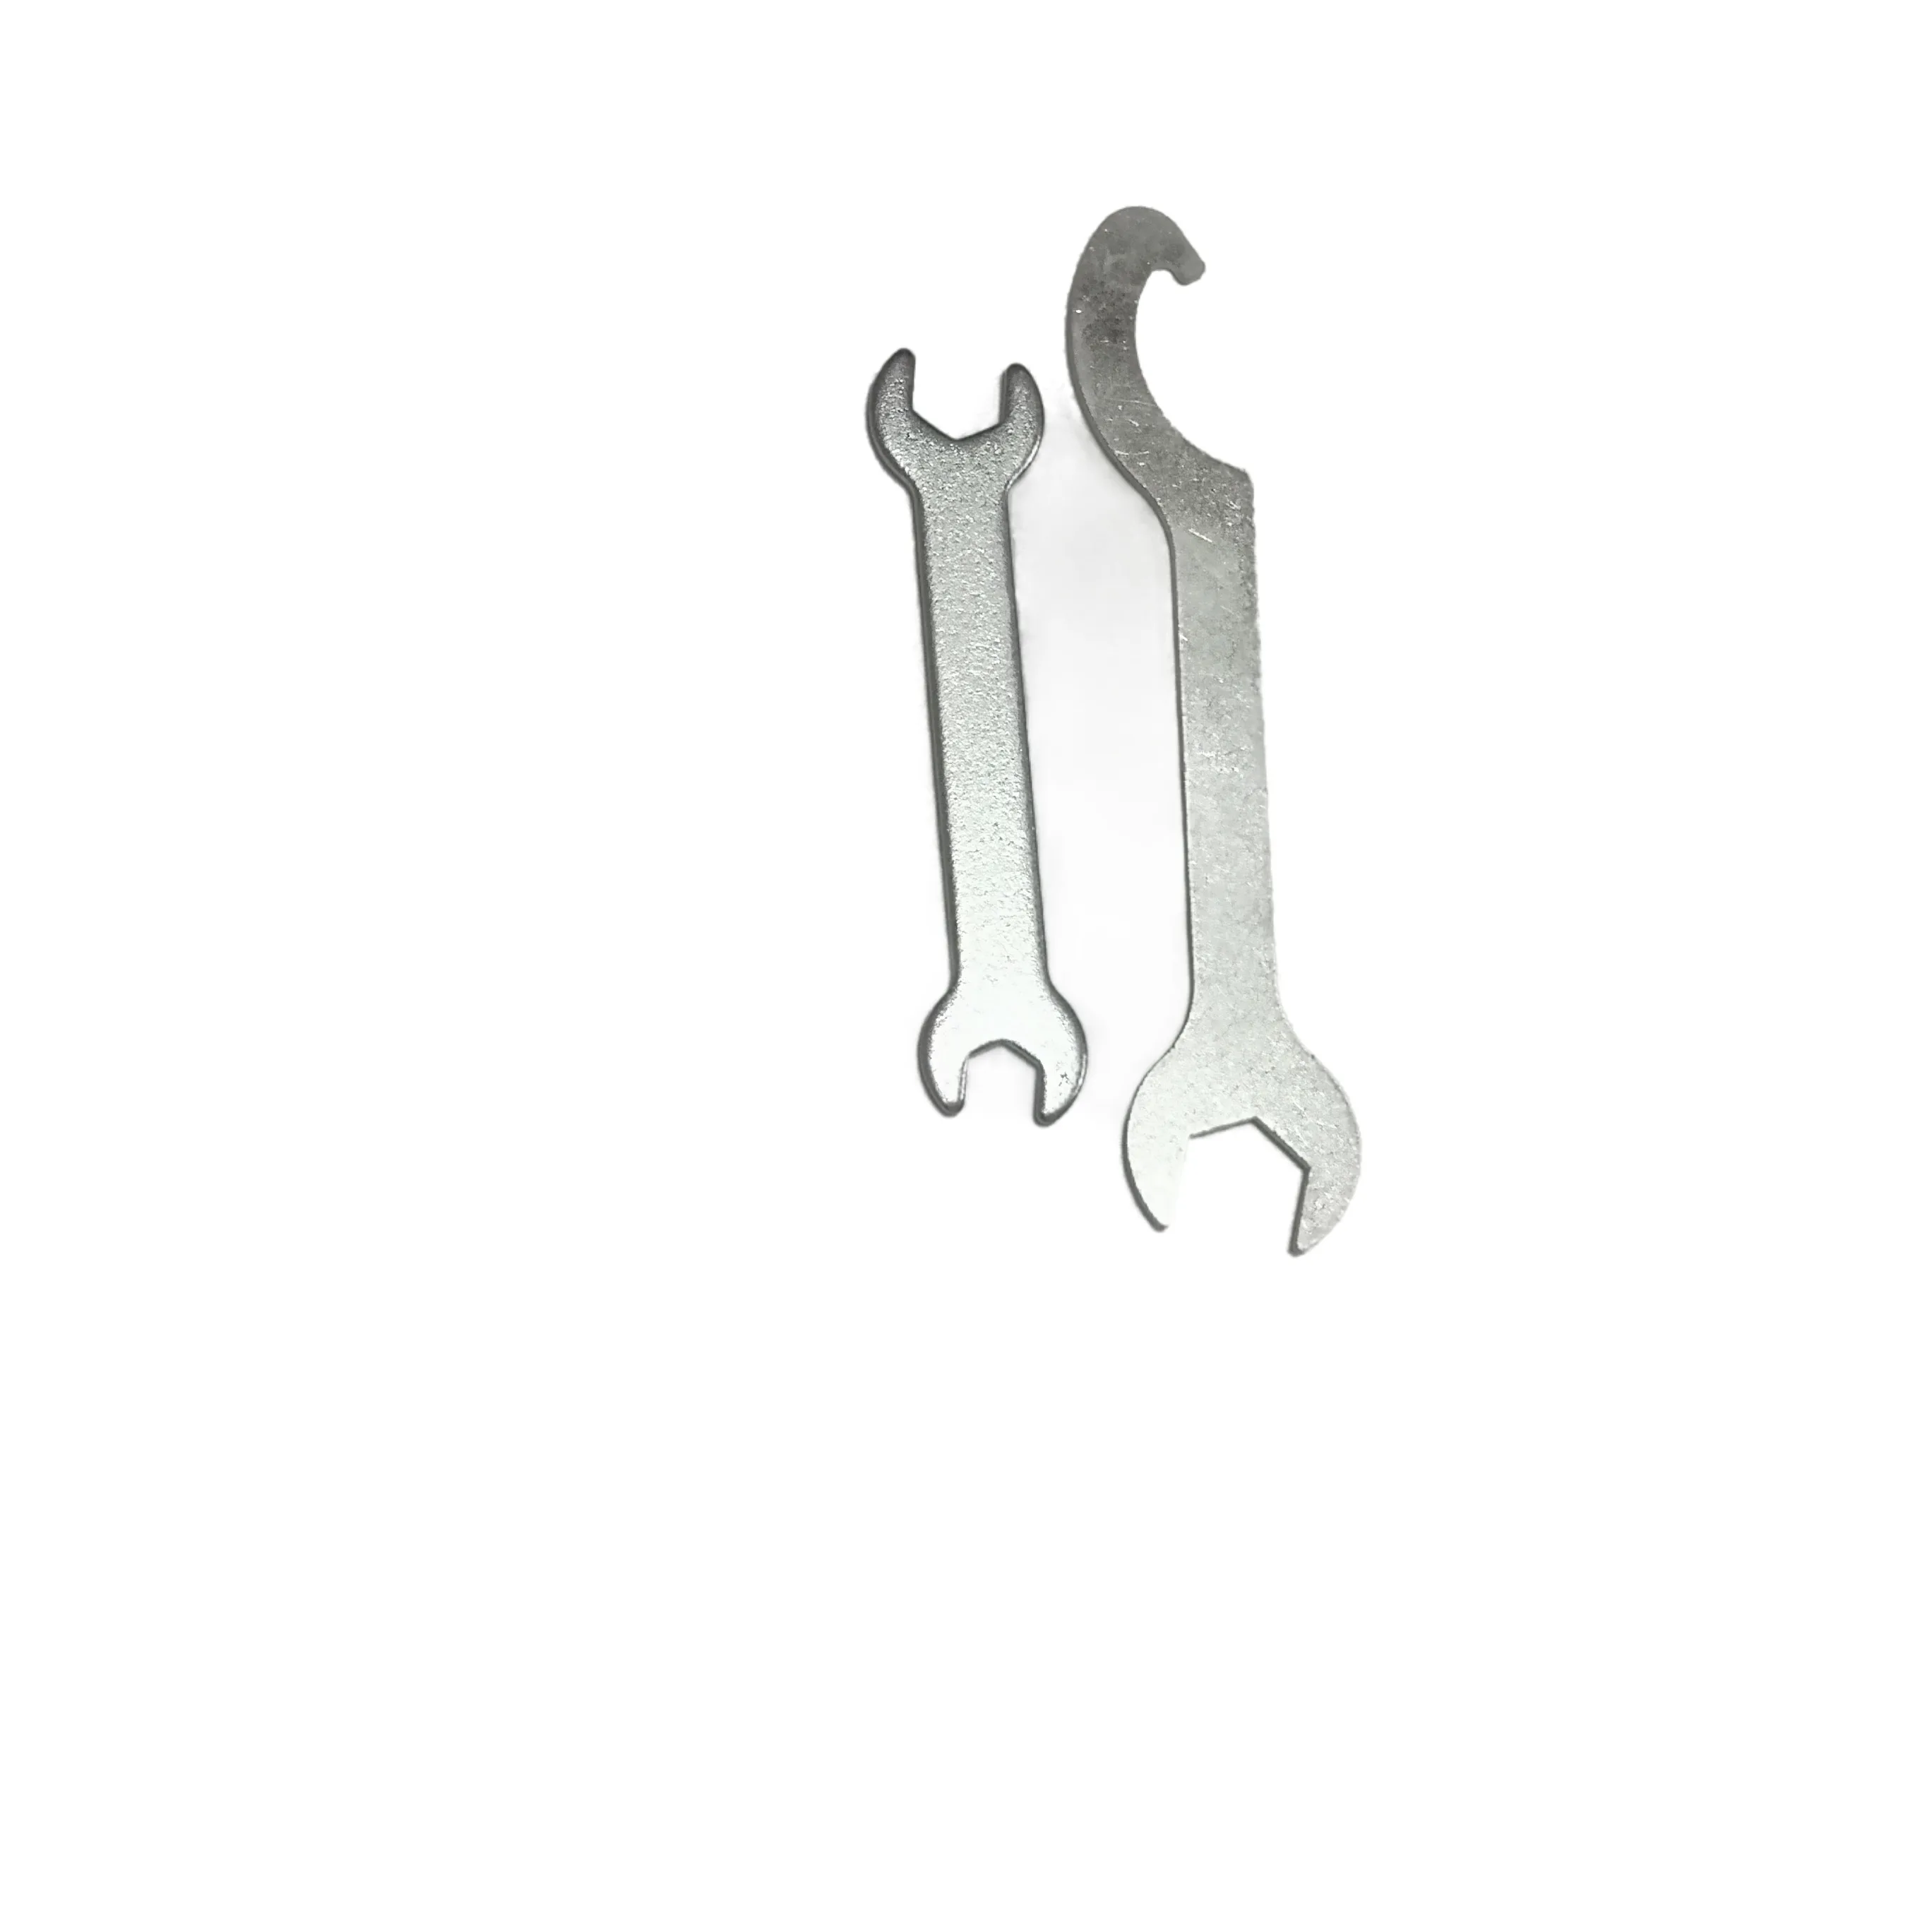 Hardware Fitting Oem Custom Carbon Steel Double Open End Flat Stamped Steel Wrench